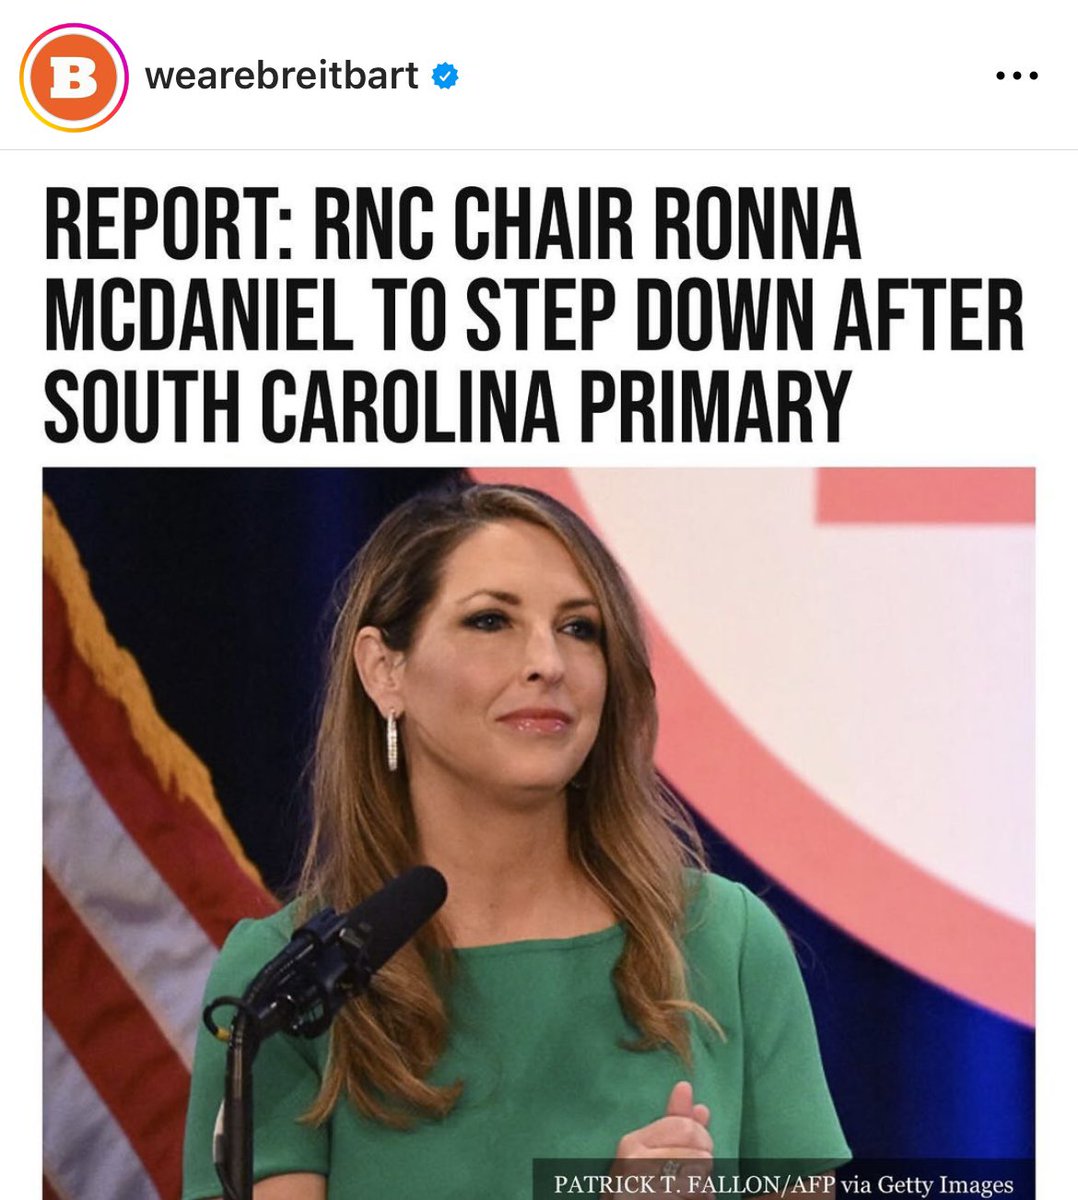 Girl bye 👋! You won’t be missed! You sucked at your job. I hope you enjoy new job at CNN. Bring on @ScottPresler who would be a perfect fit ❤️🤍💙🇺🇸 #RonnaIsAGonna #RonnaMcDaniel